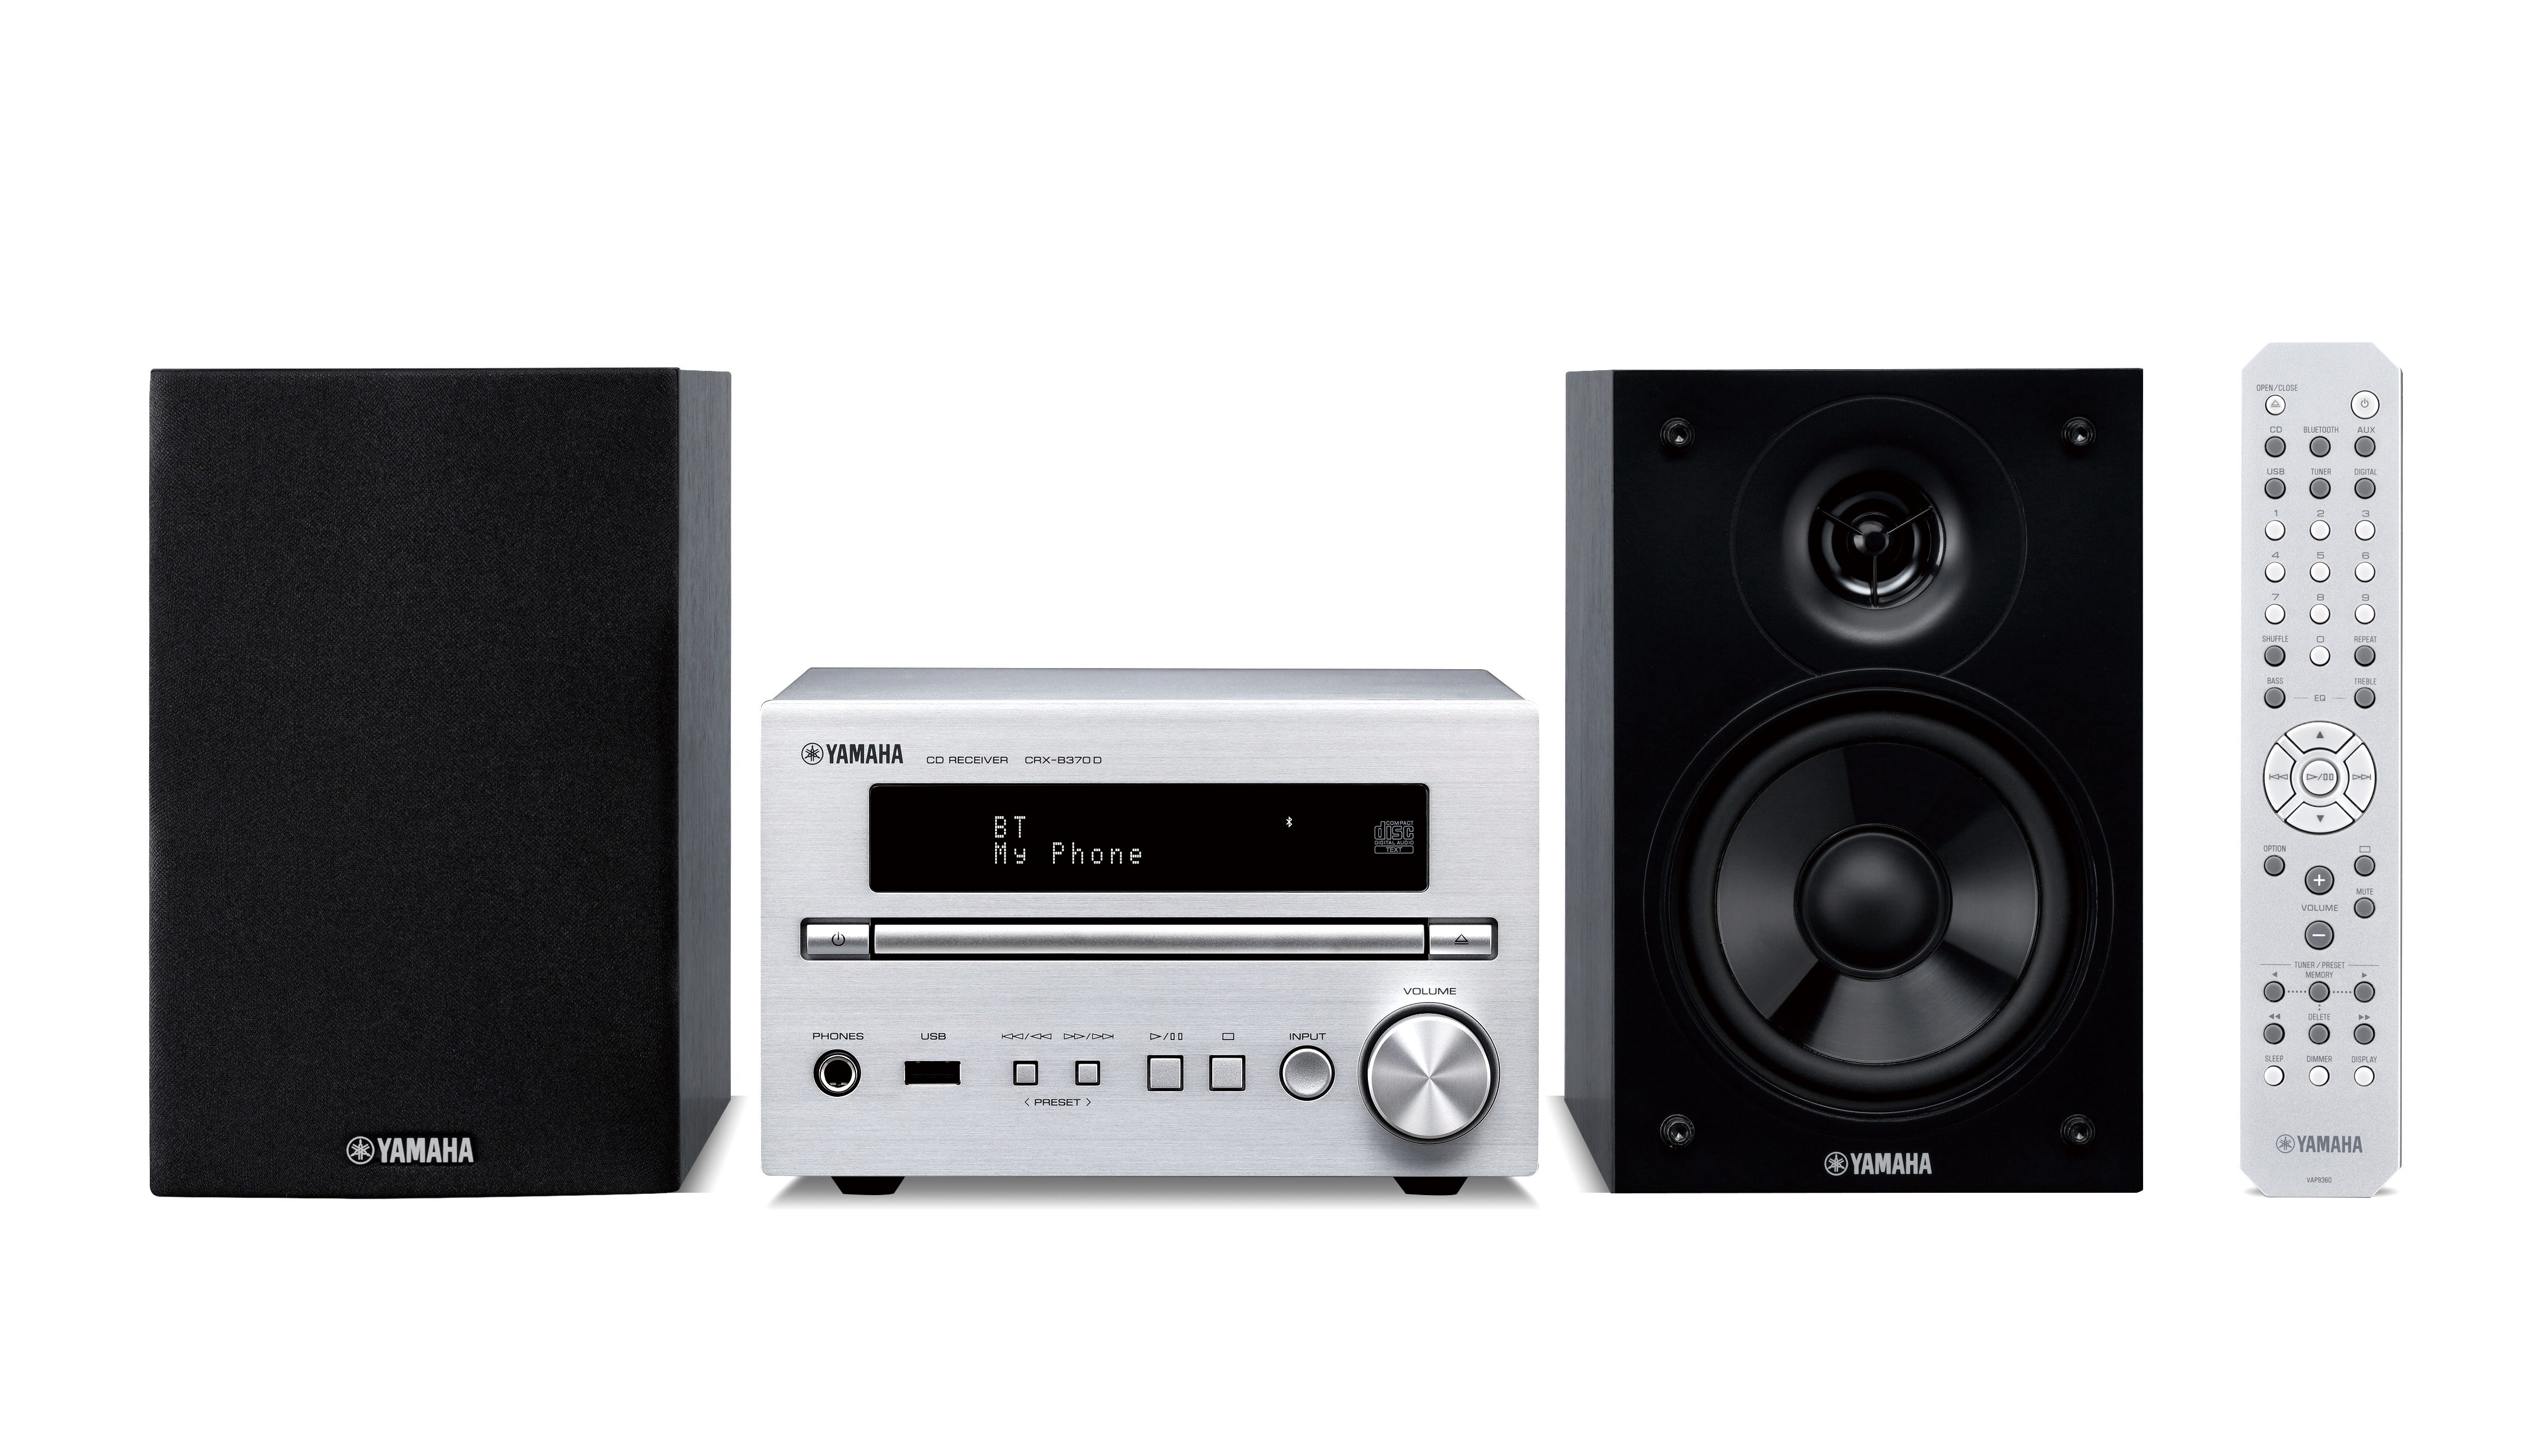 MCR-B270D - Overview - HiFi & Other - Visual Audio Products - - Yamaha European Countries - Systems